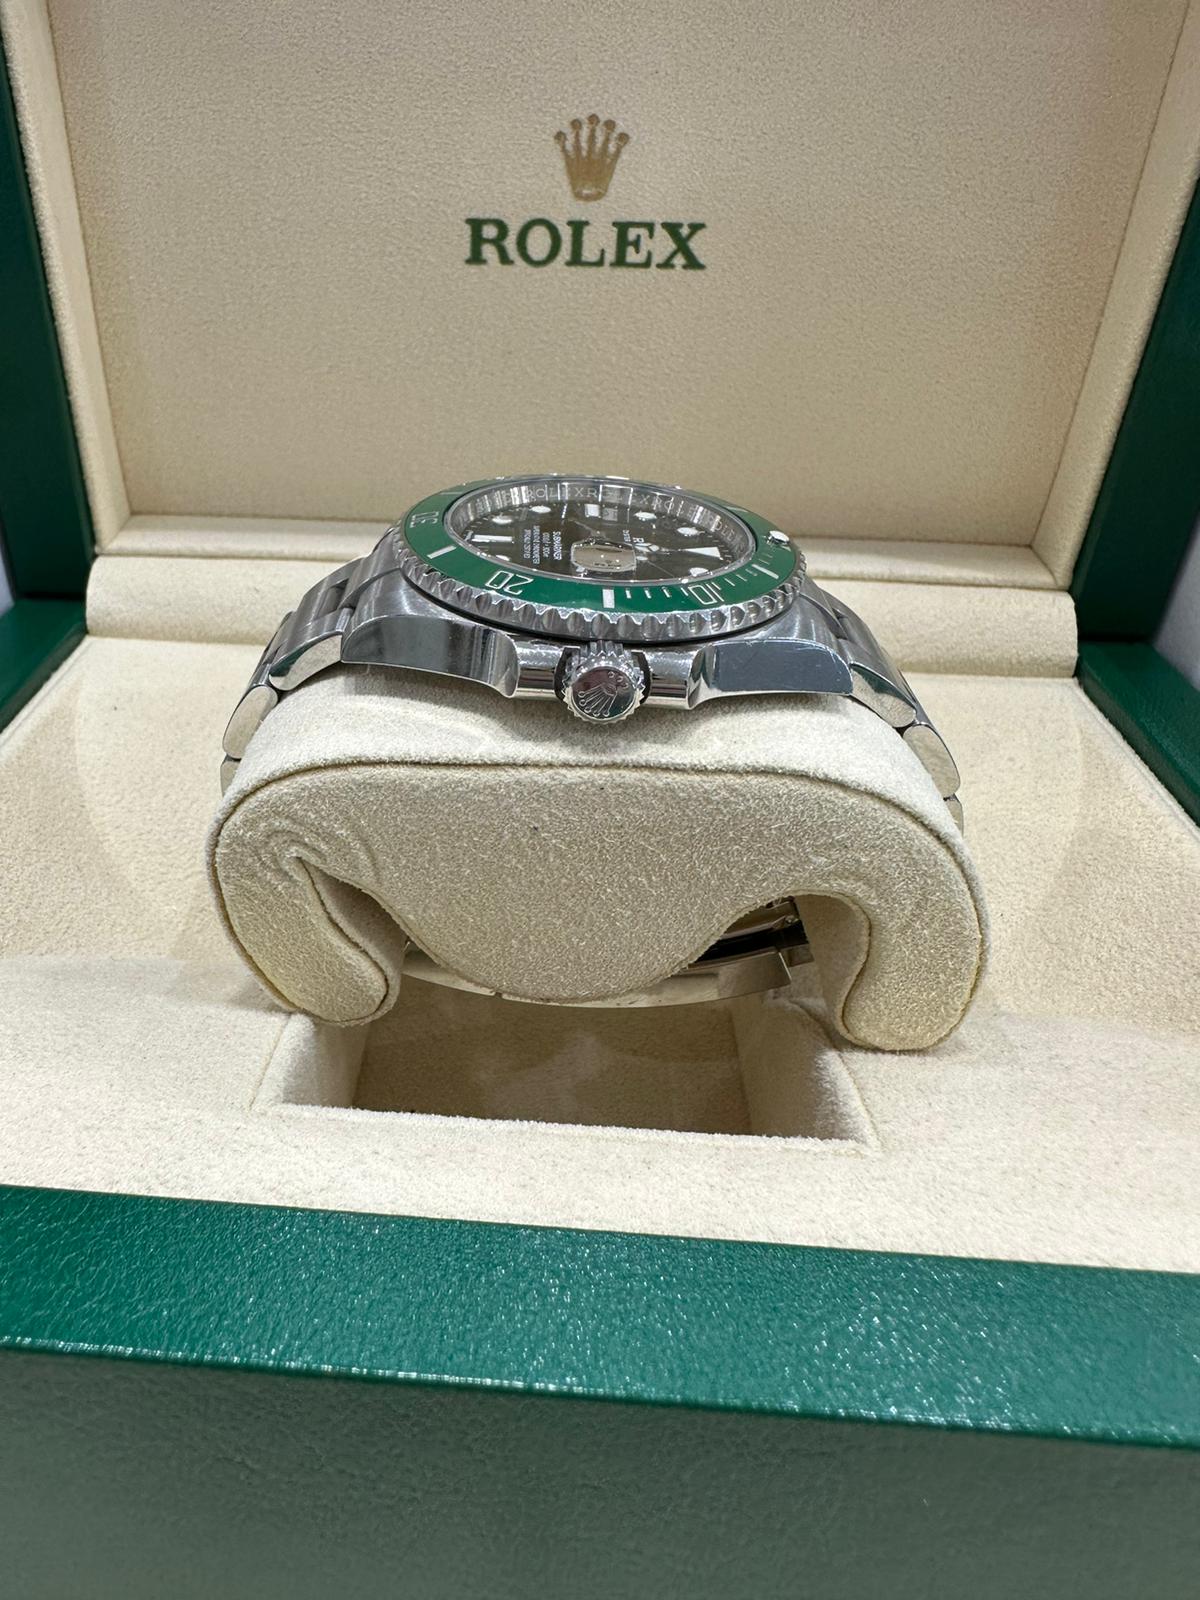 Rolex Submariner Hulk discontinued watch 2019 with - Image 3 of 10